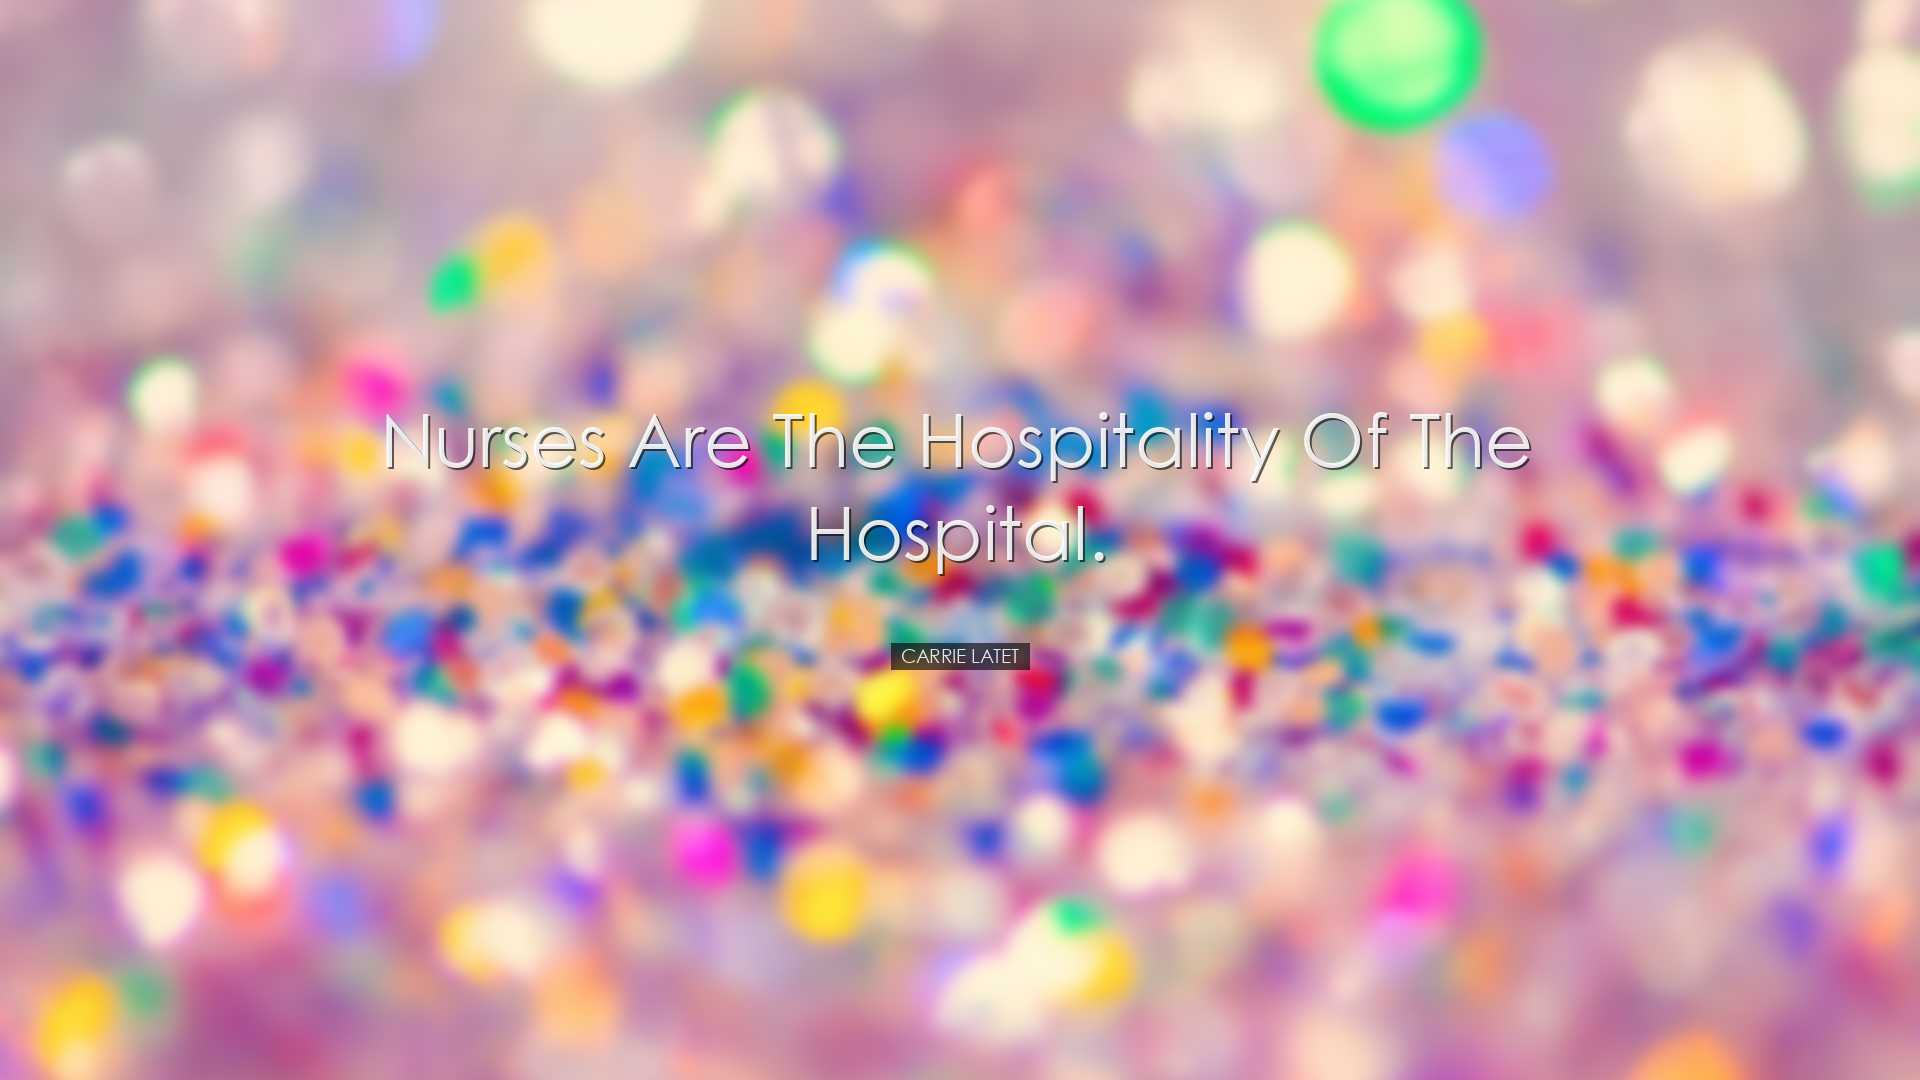 Nurses are the hospitality of the hospital. - Carrie Latet